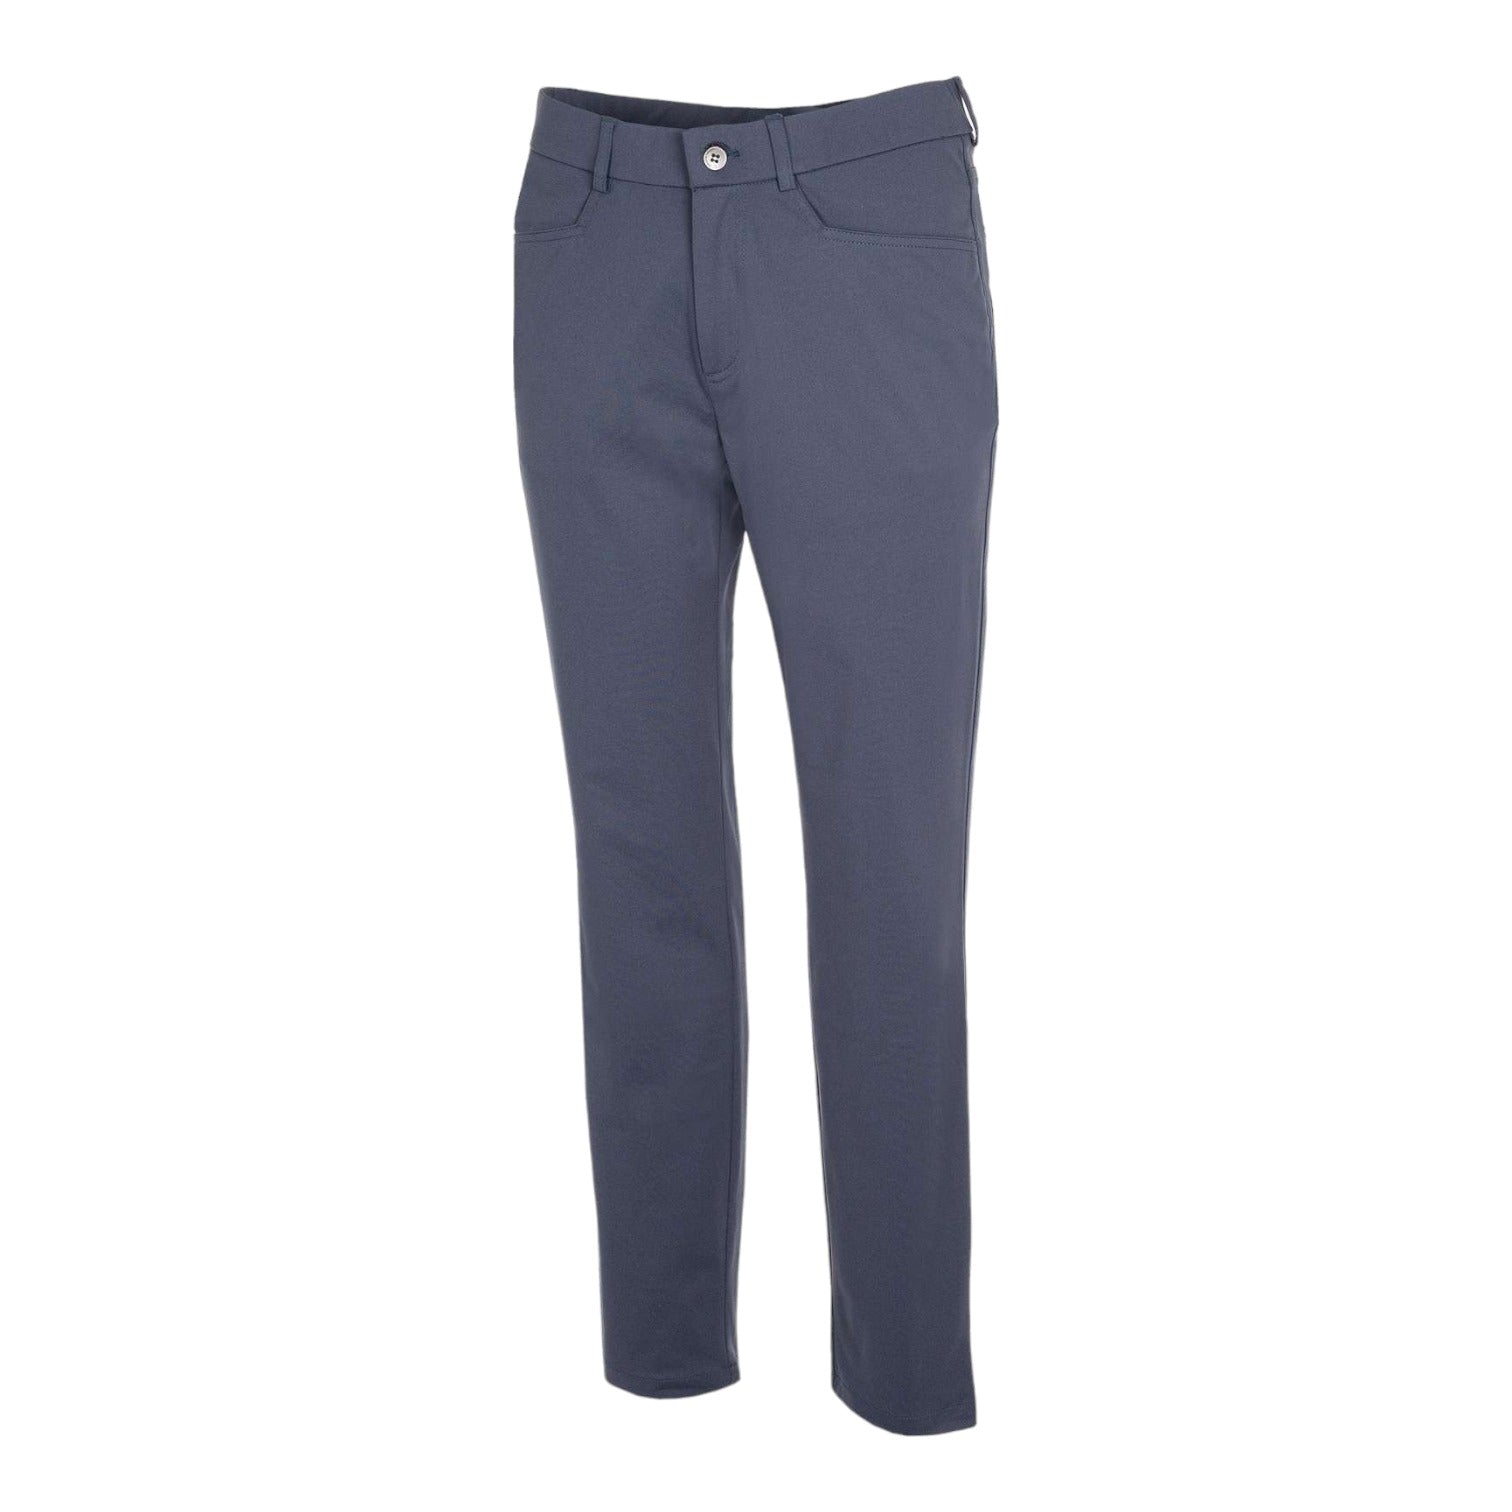 Galvin Green Norris Golf Trousers G1380